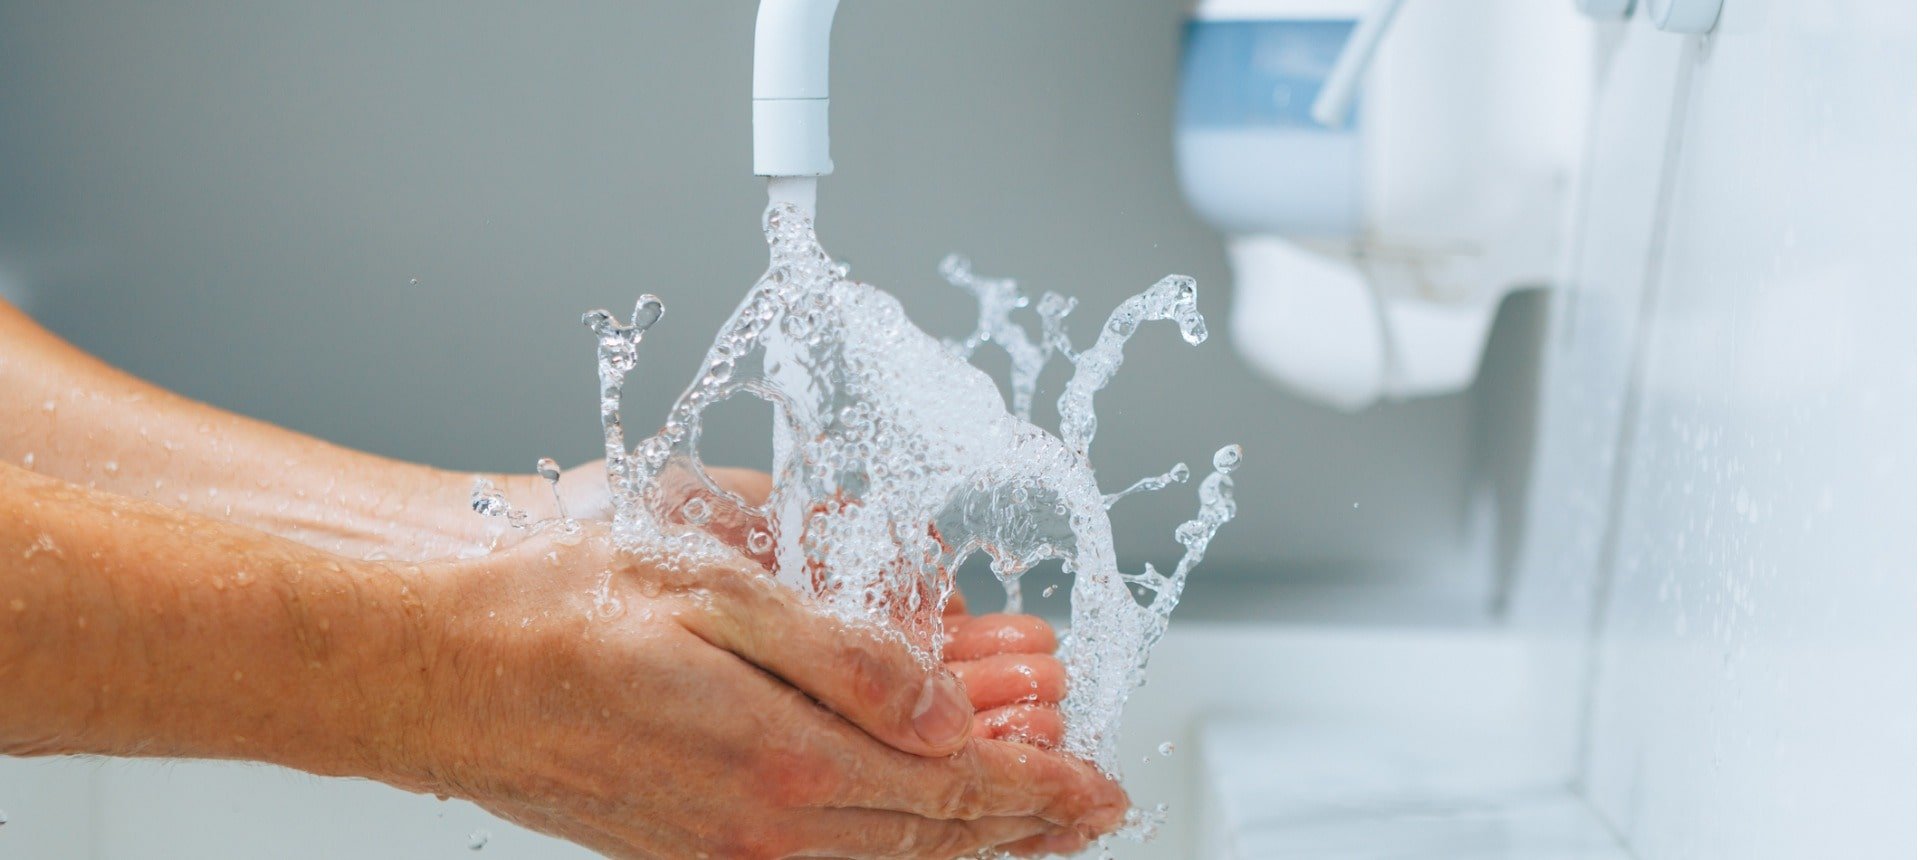 hands-under-the-faucet-with-splashing-water-picture-id1290412318-min